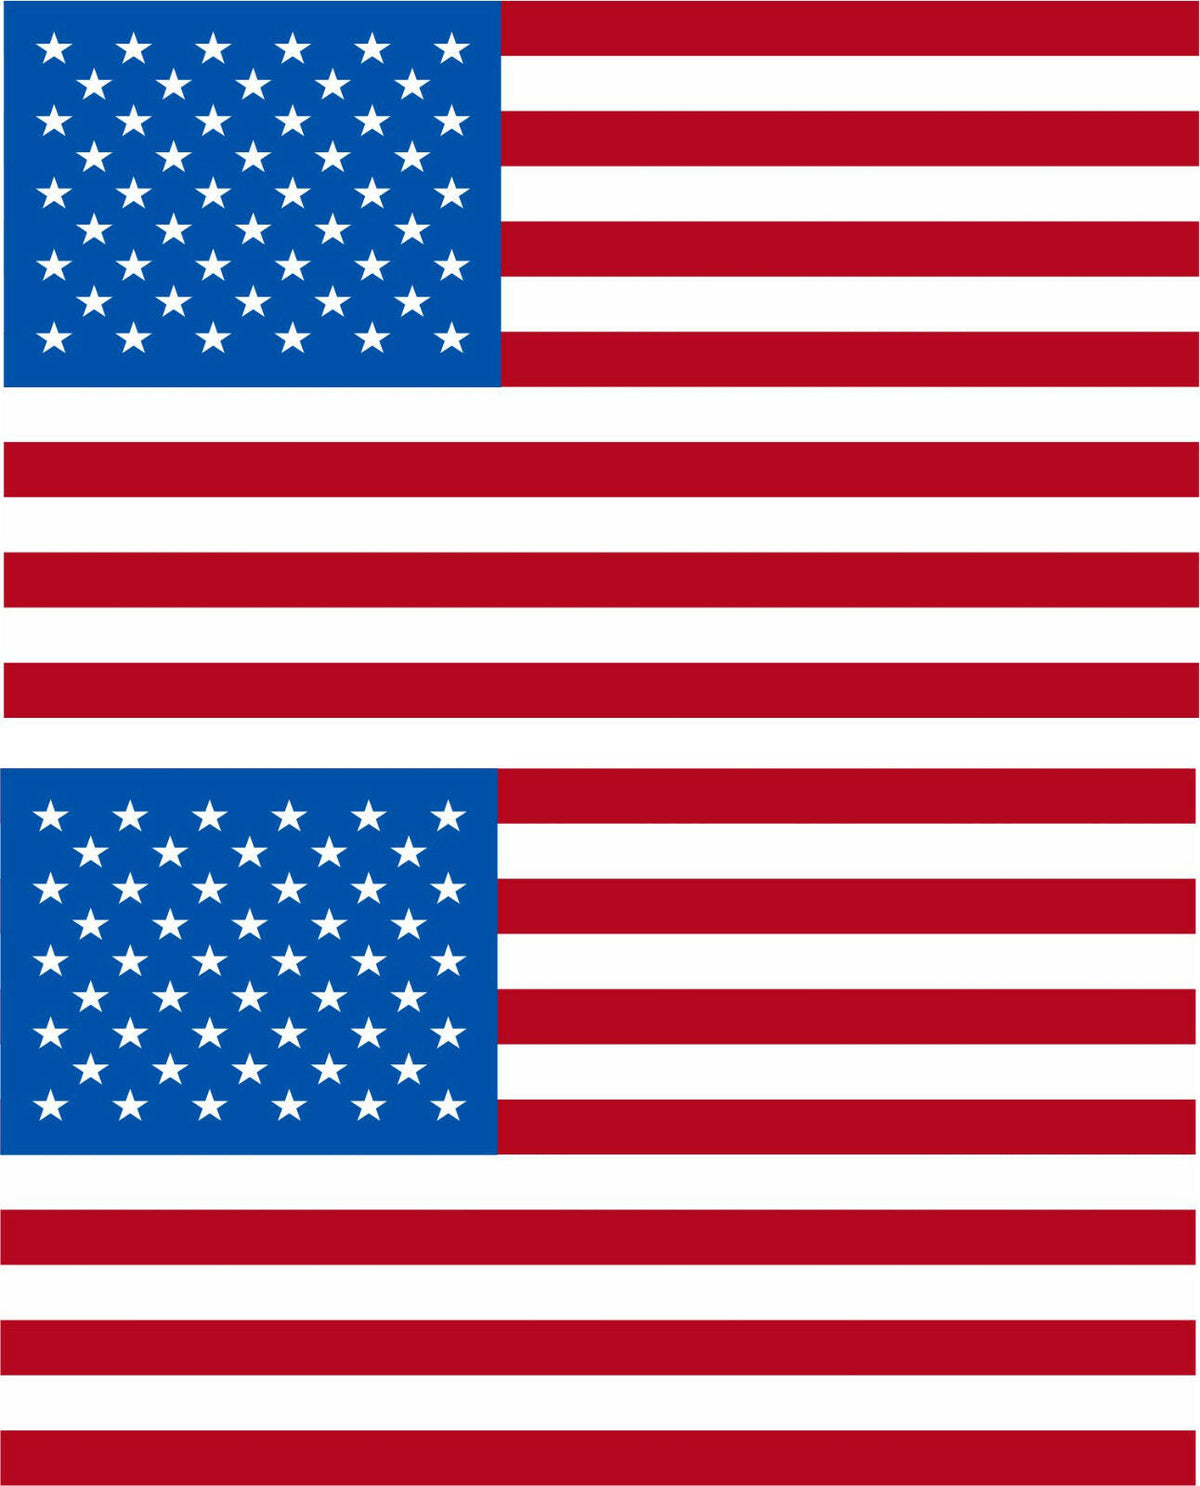 USA American Flag Decal 3M REFLECTIVE Stickers x 2 Exterior Decal Various Sizes - Powercall Sirens LLC